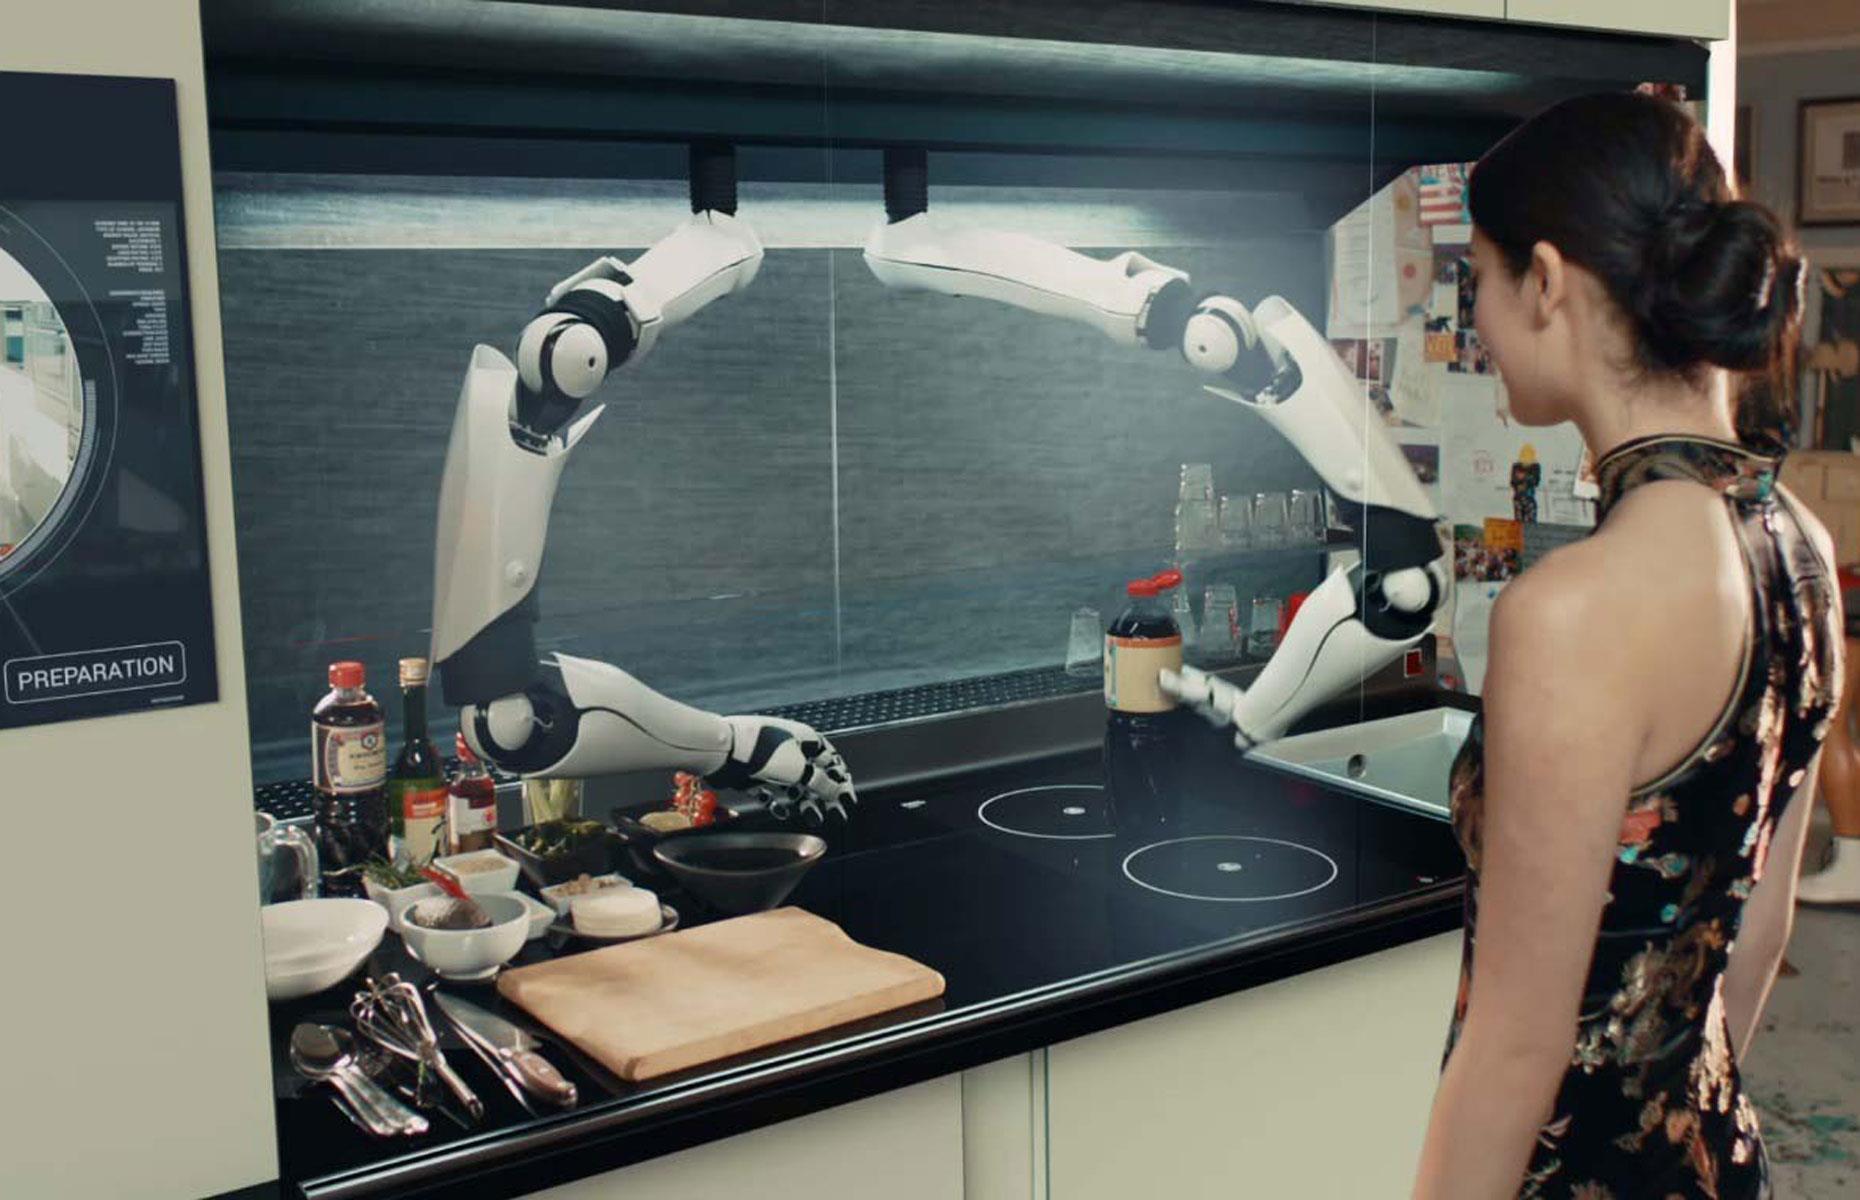 <p>The budding Gordon Ramsays out there might want to look away: Moley Robotics, a London-based start-up, has invented a 100% automated, intelligent robot chef. Billed as "the world's first robotic kitchen", the cooking automaton can whip up gourmet meals and even clean up after itself. Best of all, it can follow pretty much any recipe to the letter, precisely mimicking your favorite Michelin-starred chef or cookery writer.</p>  <p>Automated chefs were also responsible for rustling up dishes for athletes at the Beijing Olympics. With a repertoire that included Chinese and Western food, as well as fast-food dishes, the robotic caterers can serve thousands of different meals. This was a crucial part of the Olympics' "closed-loop" system, which stopped athletes and reporters from leaving the site once they'd entered to limit the spread of COVID-19. </p>